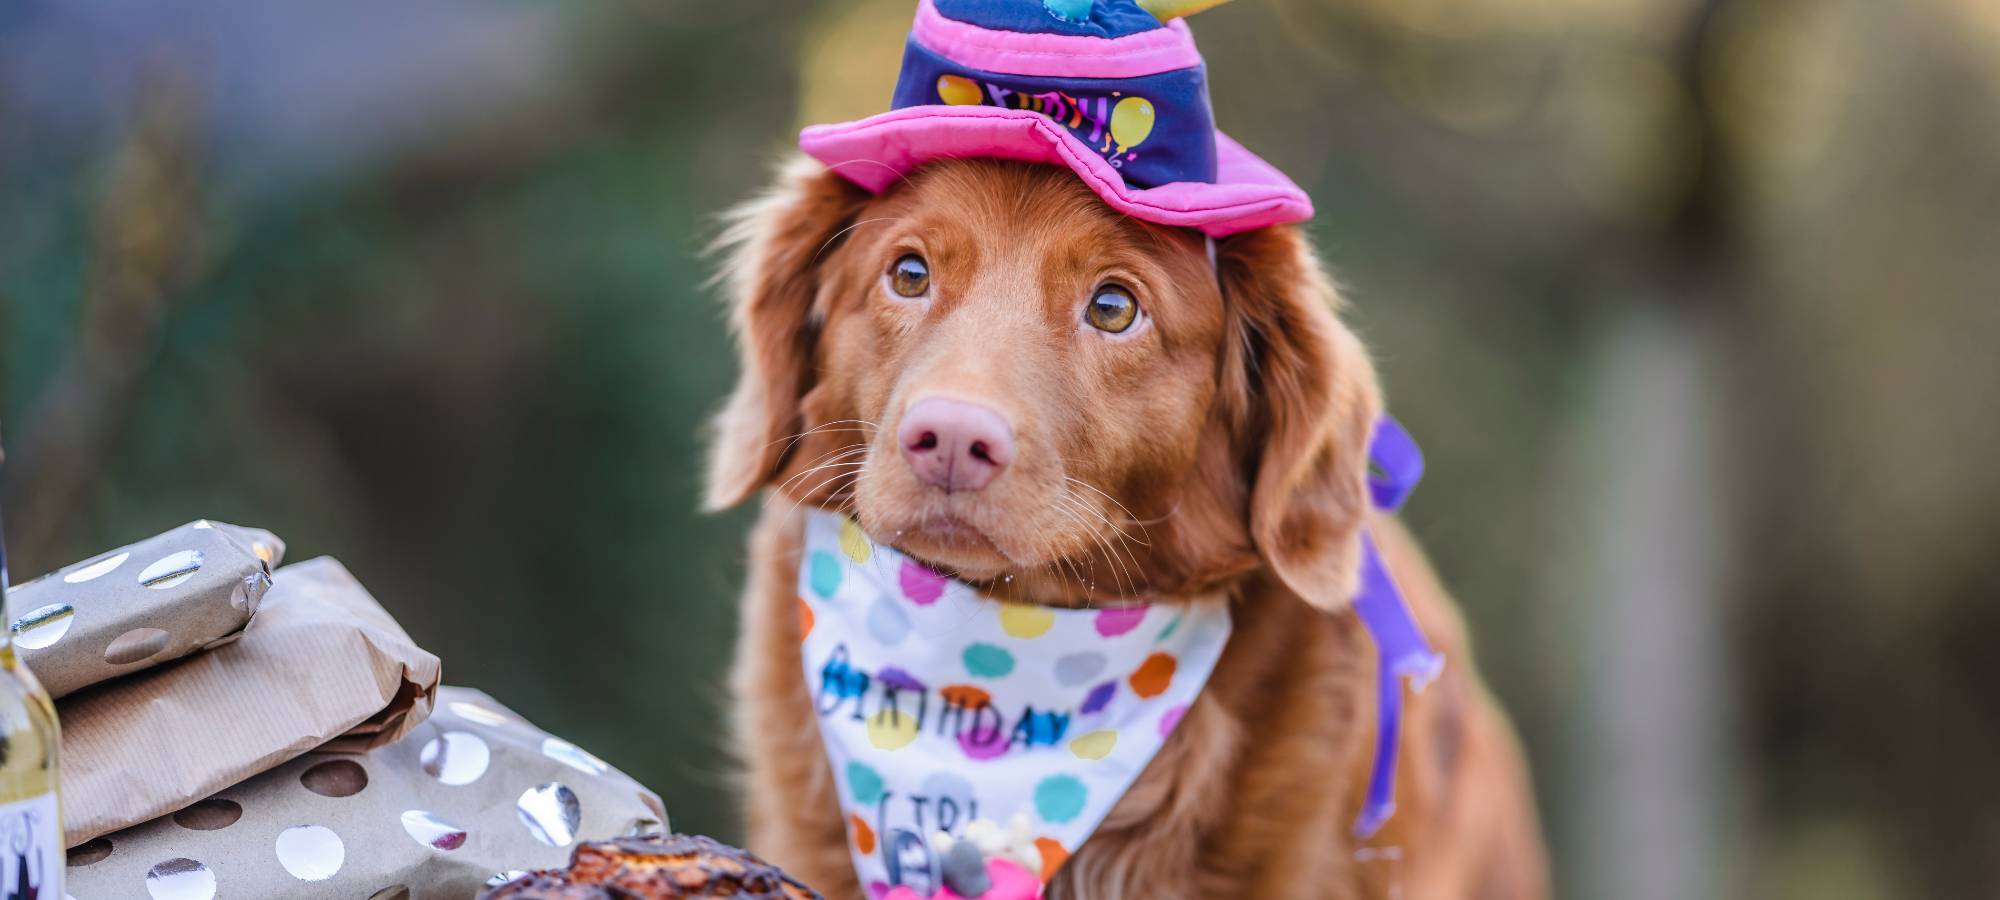 How to throw a pawfect dog birthday party